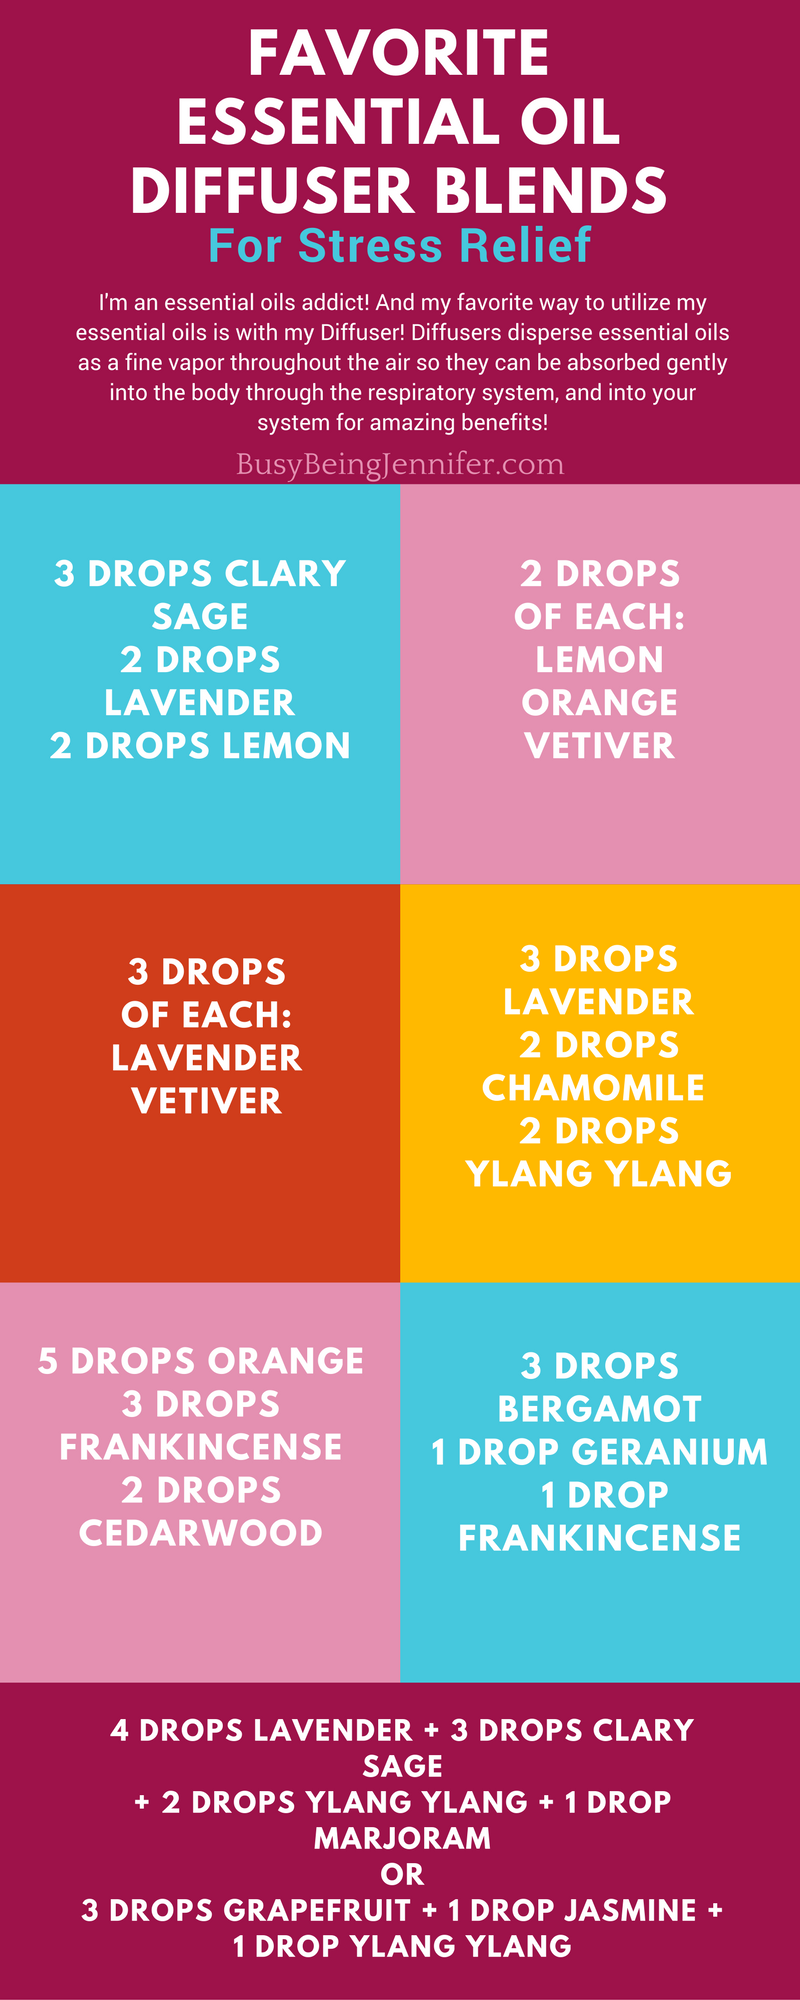 Favorite Essential Oils for Stress Relief Blends for the Diffuser!